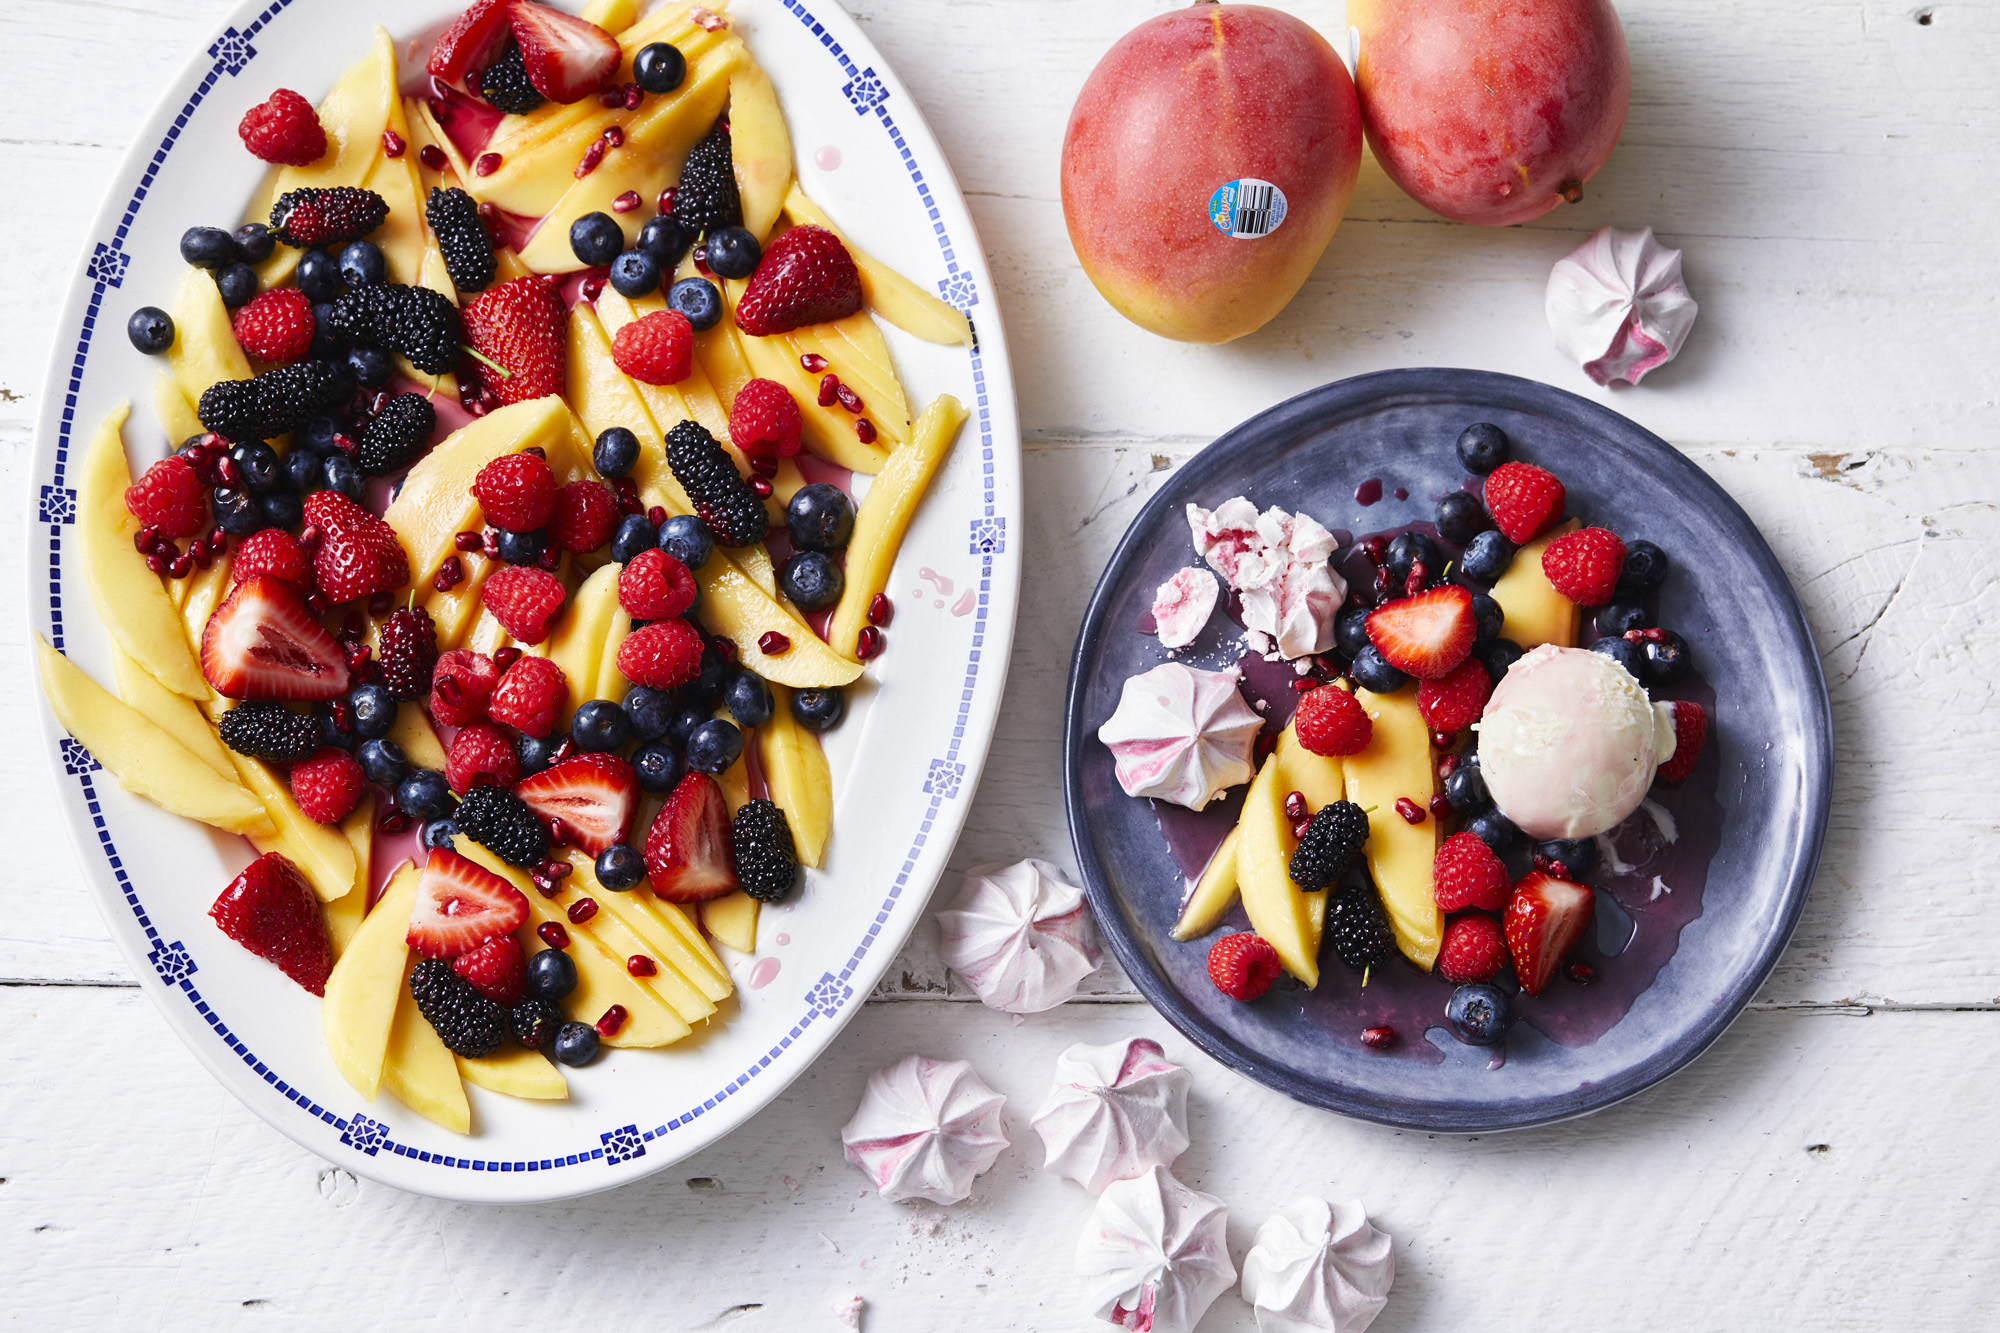 Calypso Mango & Mixed Berries Fruit Salad with Rose Syrup